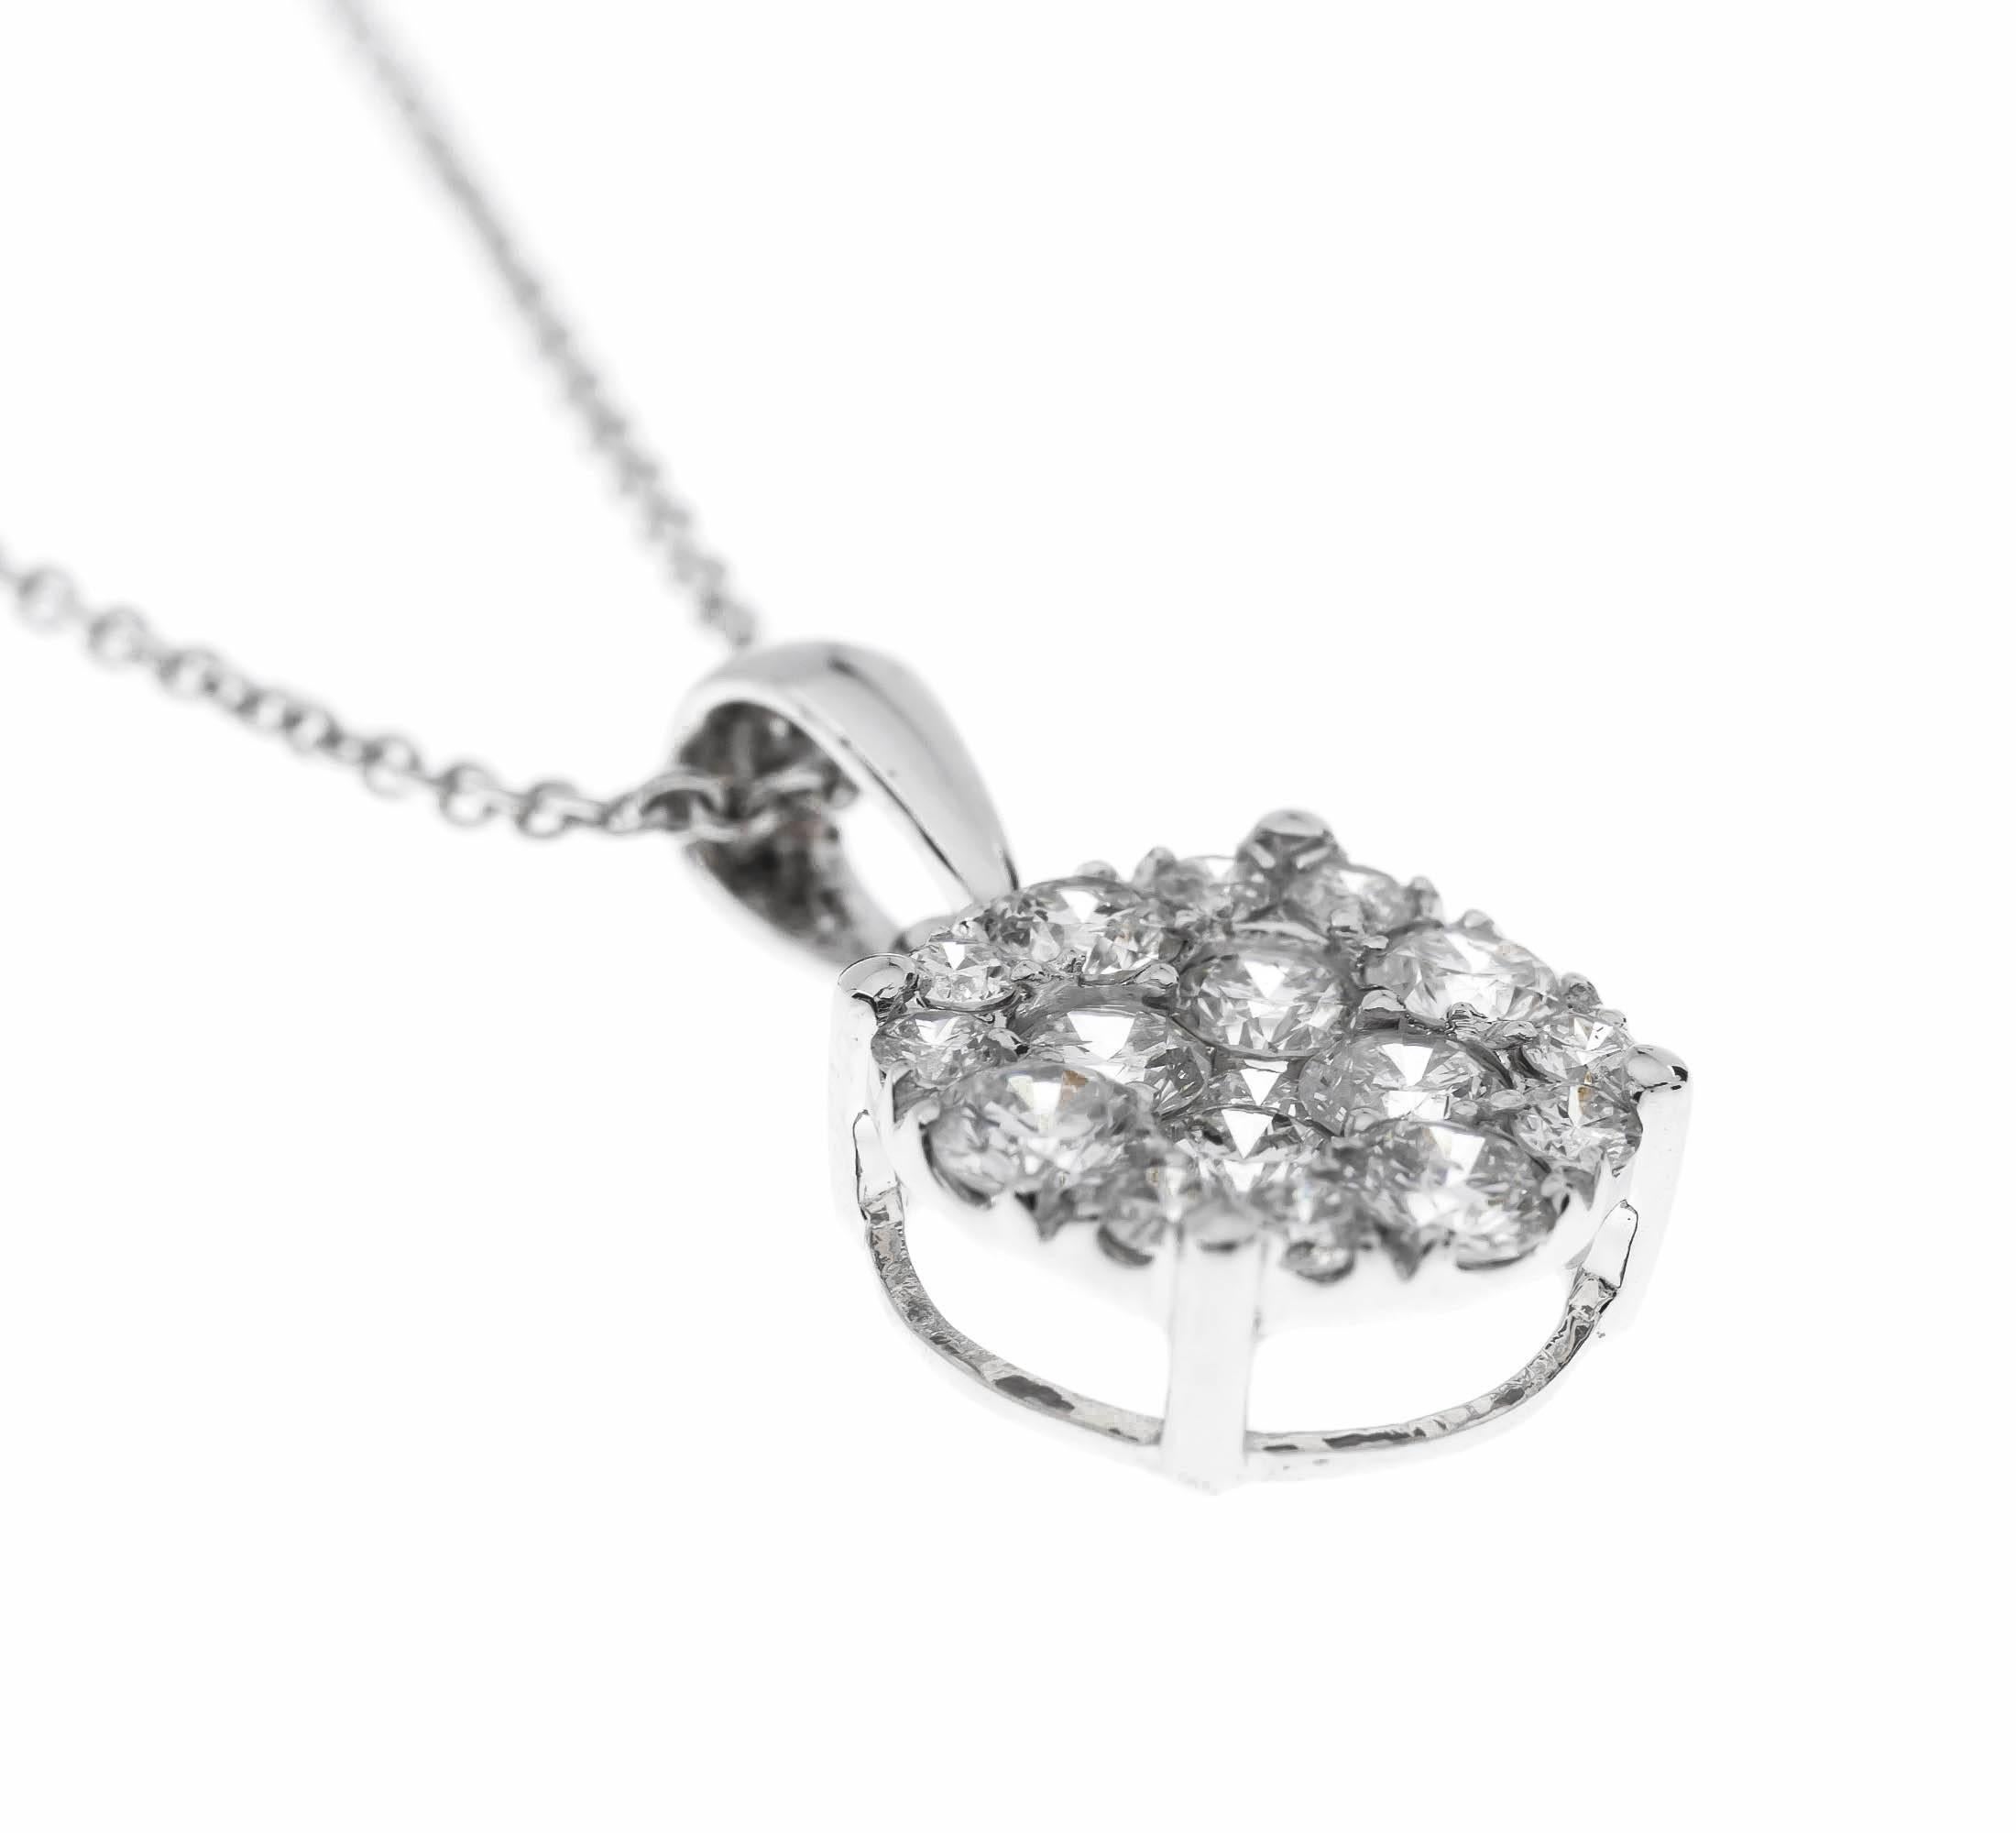 GEMMOLOGIST'S NOTES

This gorgeous pendant, that is encrusted with 1ct of sparkling diamonds, all set in a cool white gold, suspended from a subtle trace chain.

Want some more sparkle? Matching earrings and ring also